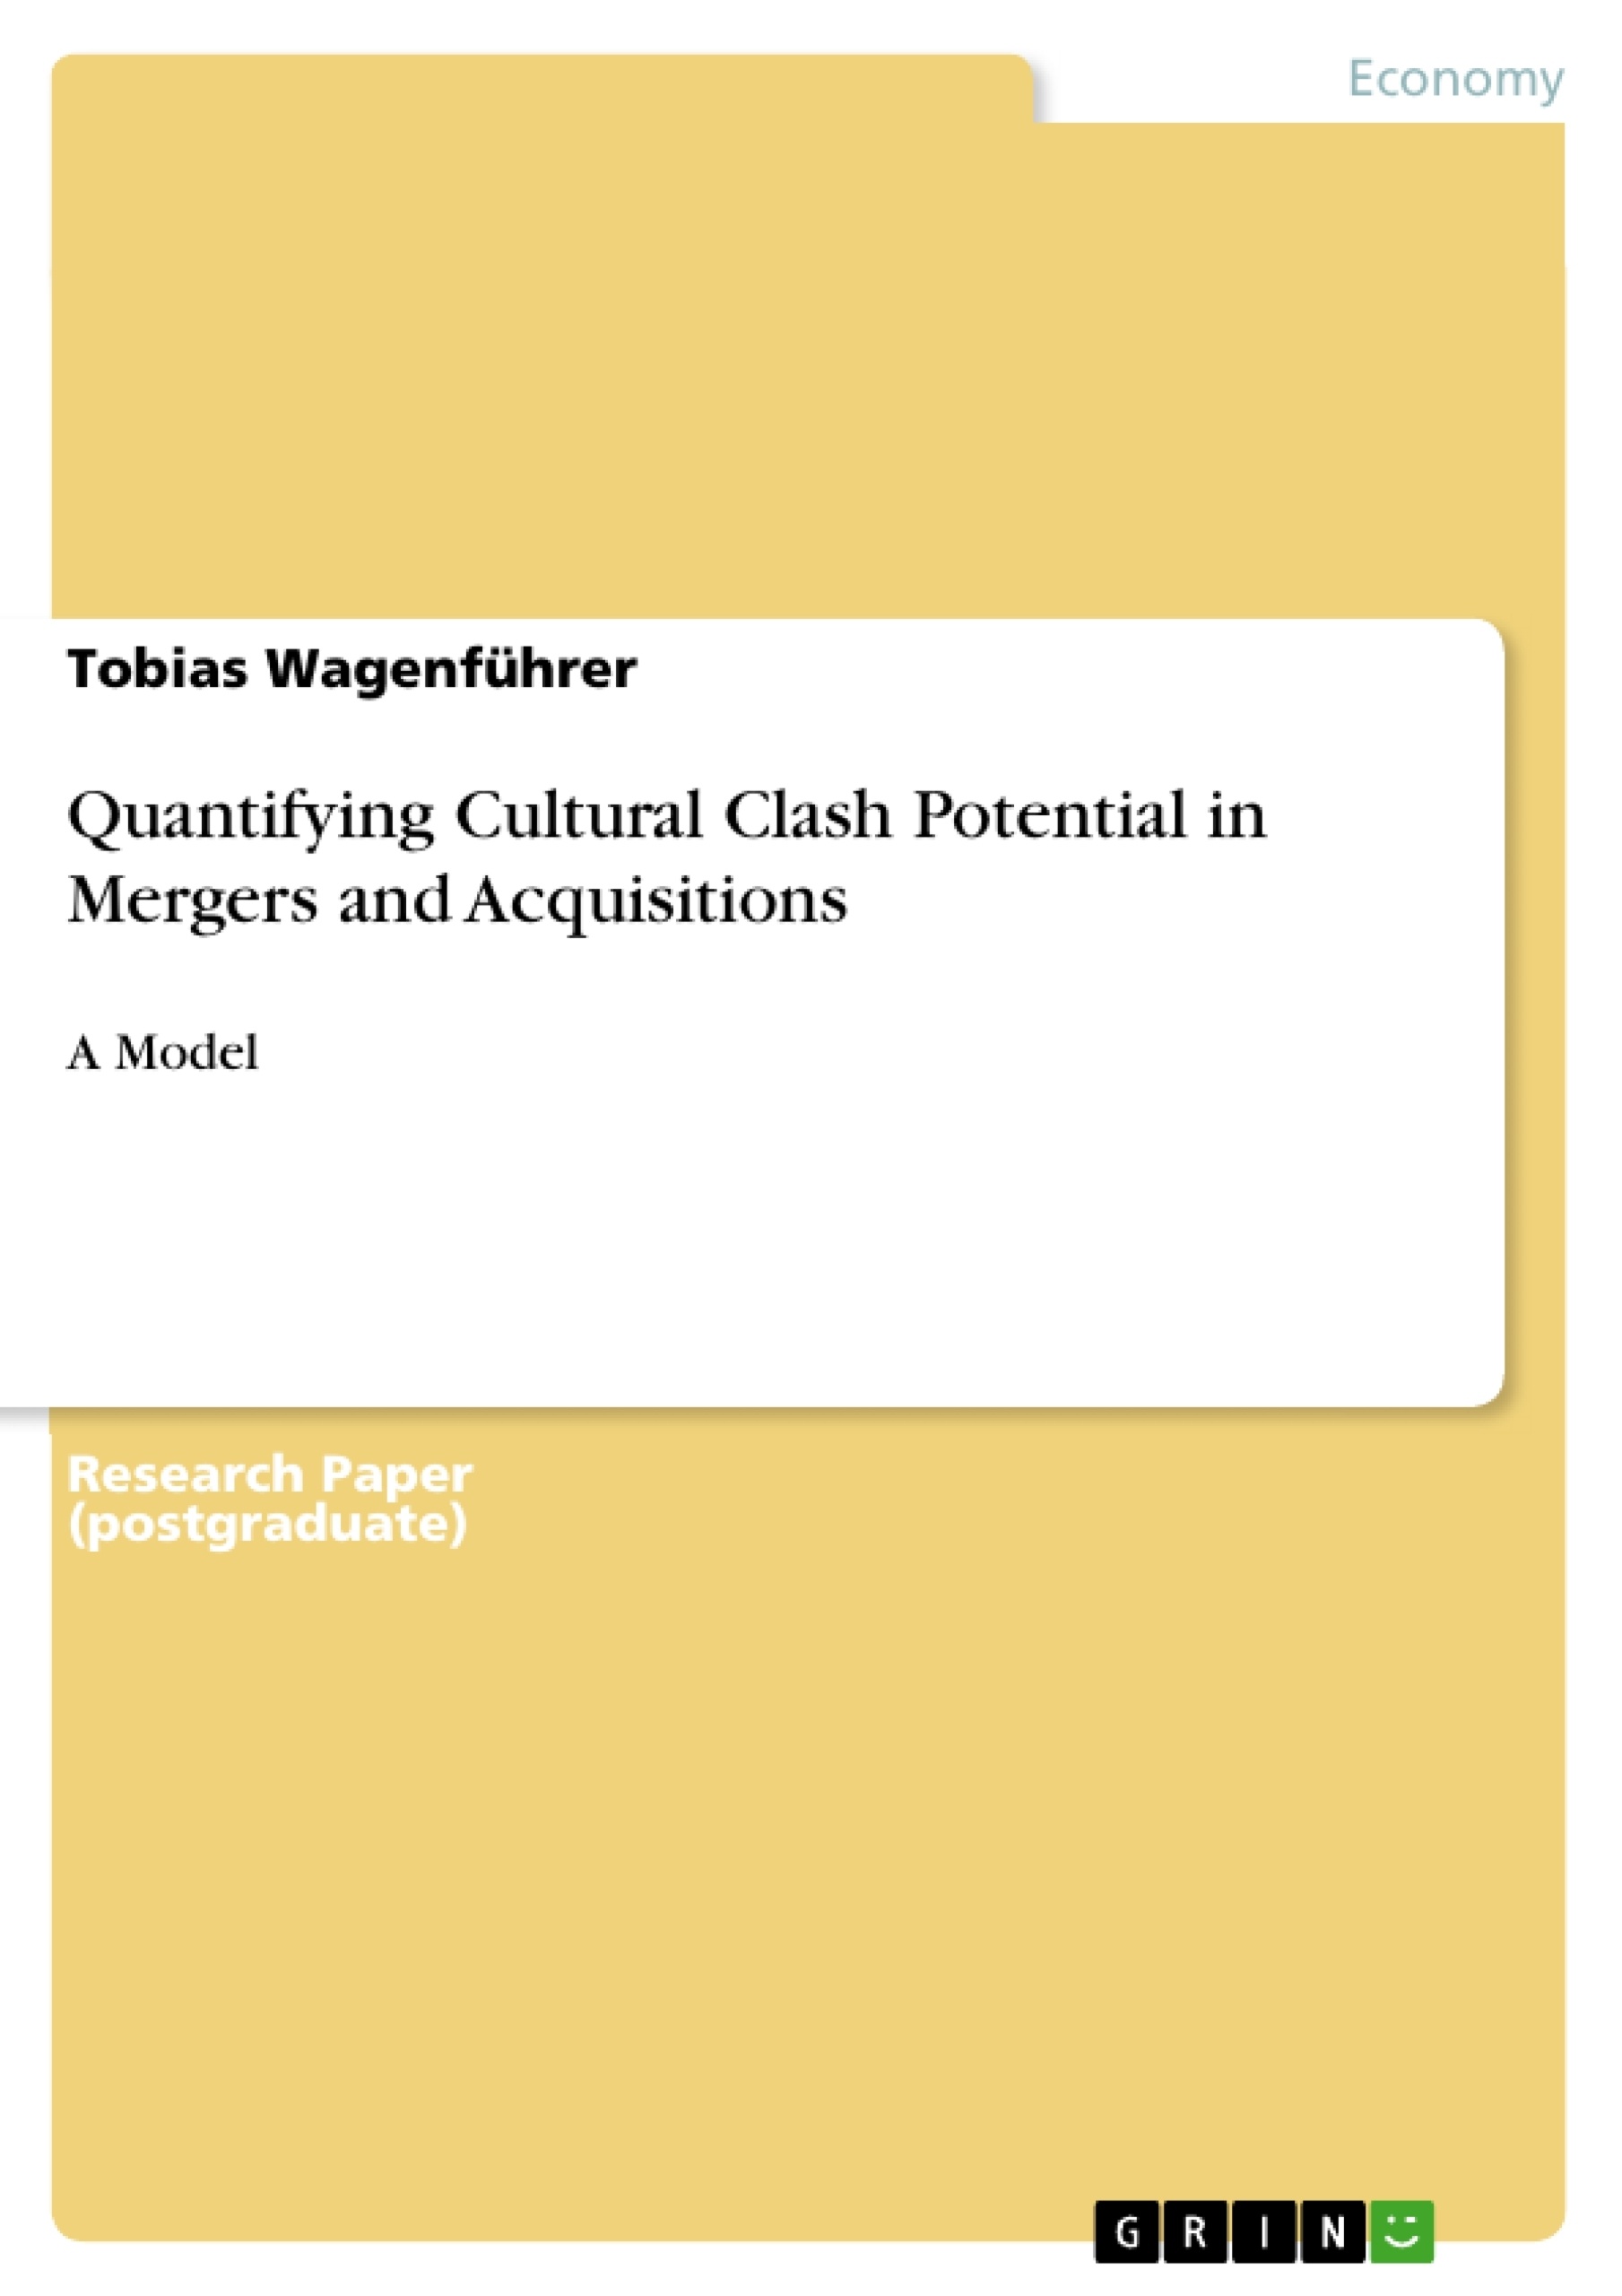 Título: Quantifying Cultural Clash Potential in Mergers and Acquisitions